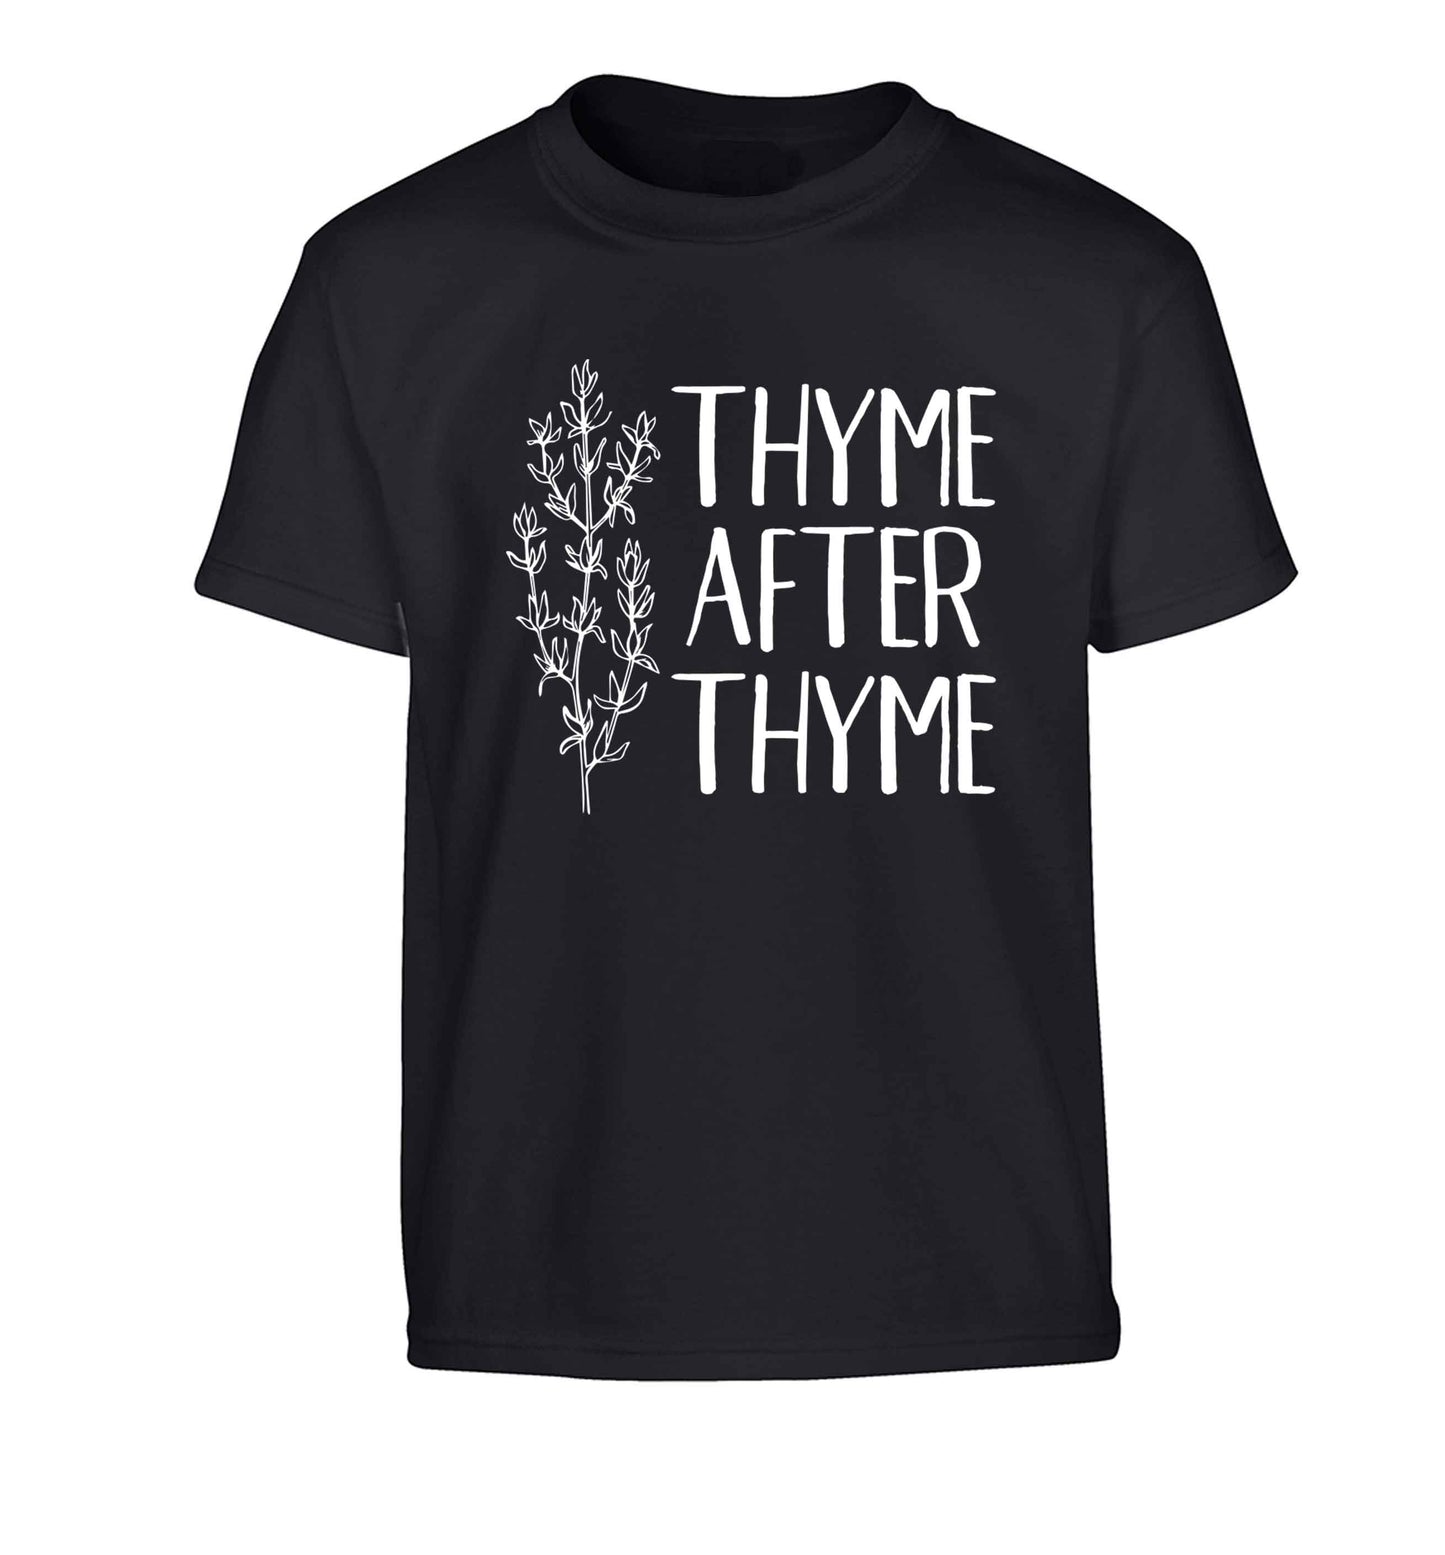 Thyme after thyme Children's black Tshirt 12-13 Years